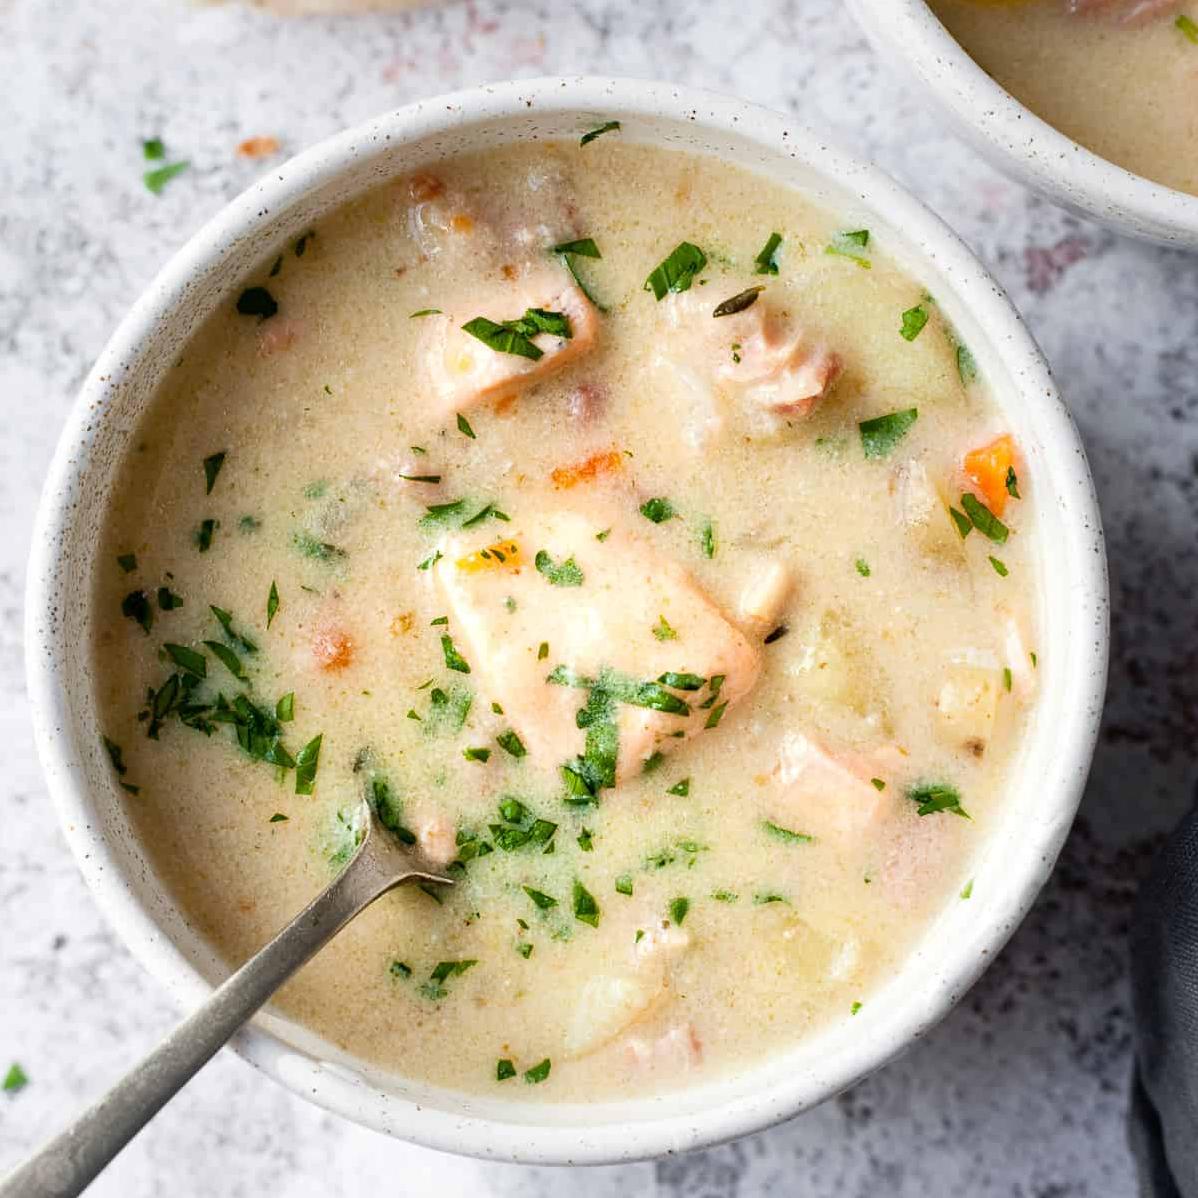  A seafood chowder that'll leave you feeling rich and indulgent.